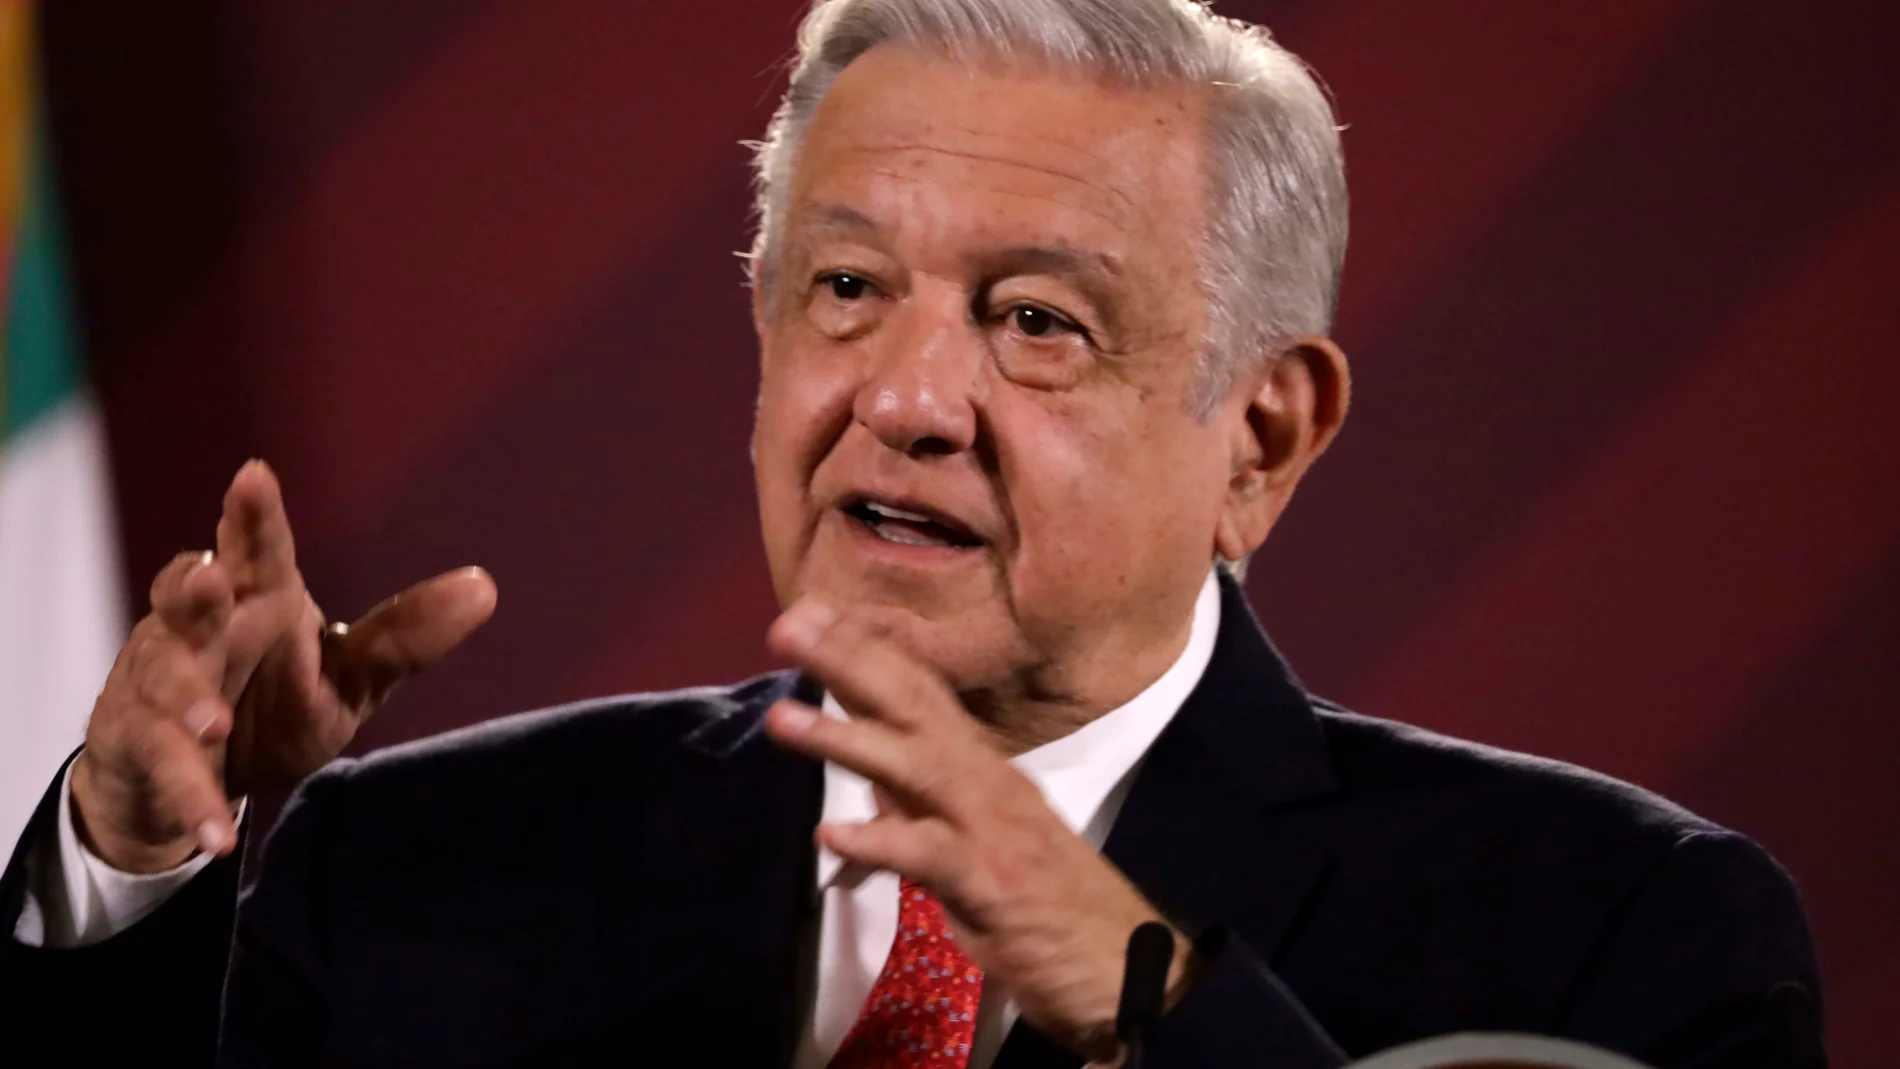 August 28, 2023, Mexico City, Mexico: August 28, 2023, Mexico City, Mexico: Mexican President Andres Manuel Lopez Obrador at the press conference before reporters at the National Palace in Mexico City. on August 28, 2023 in Mexico City, Mexico (Photo by Luis Barron / Eyepix Group) 28/08/2023